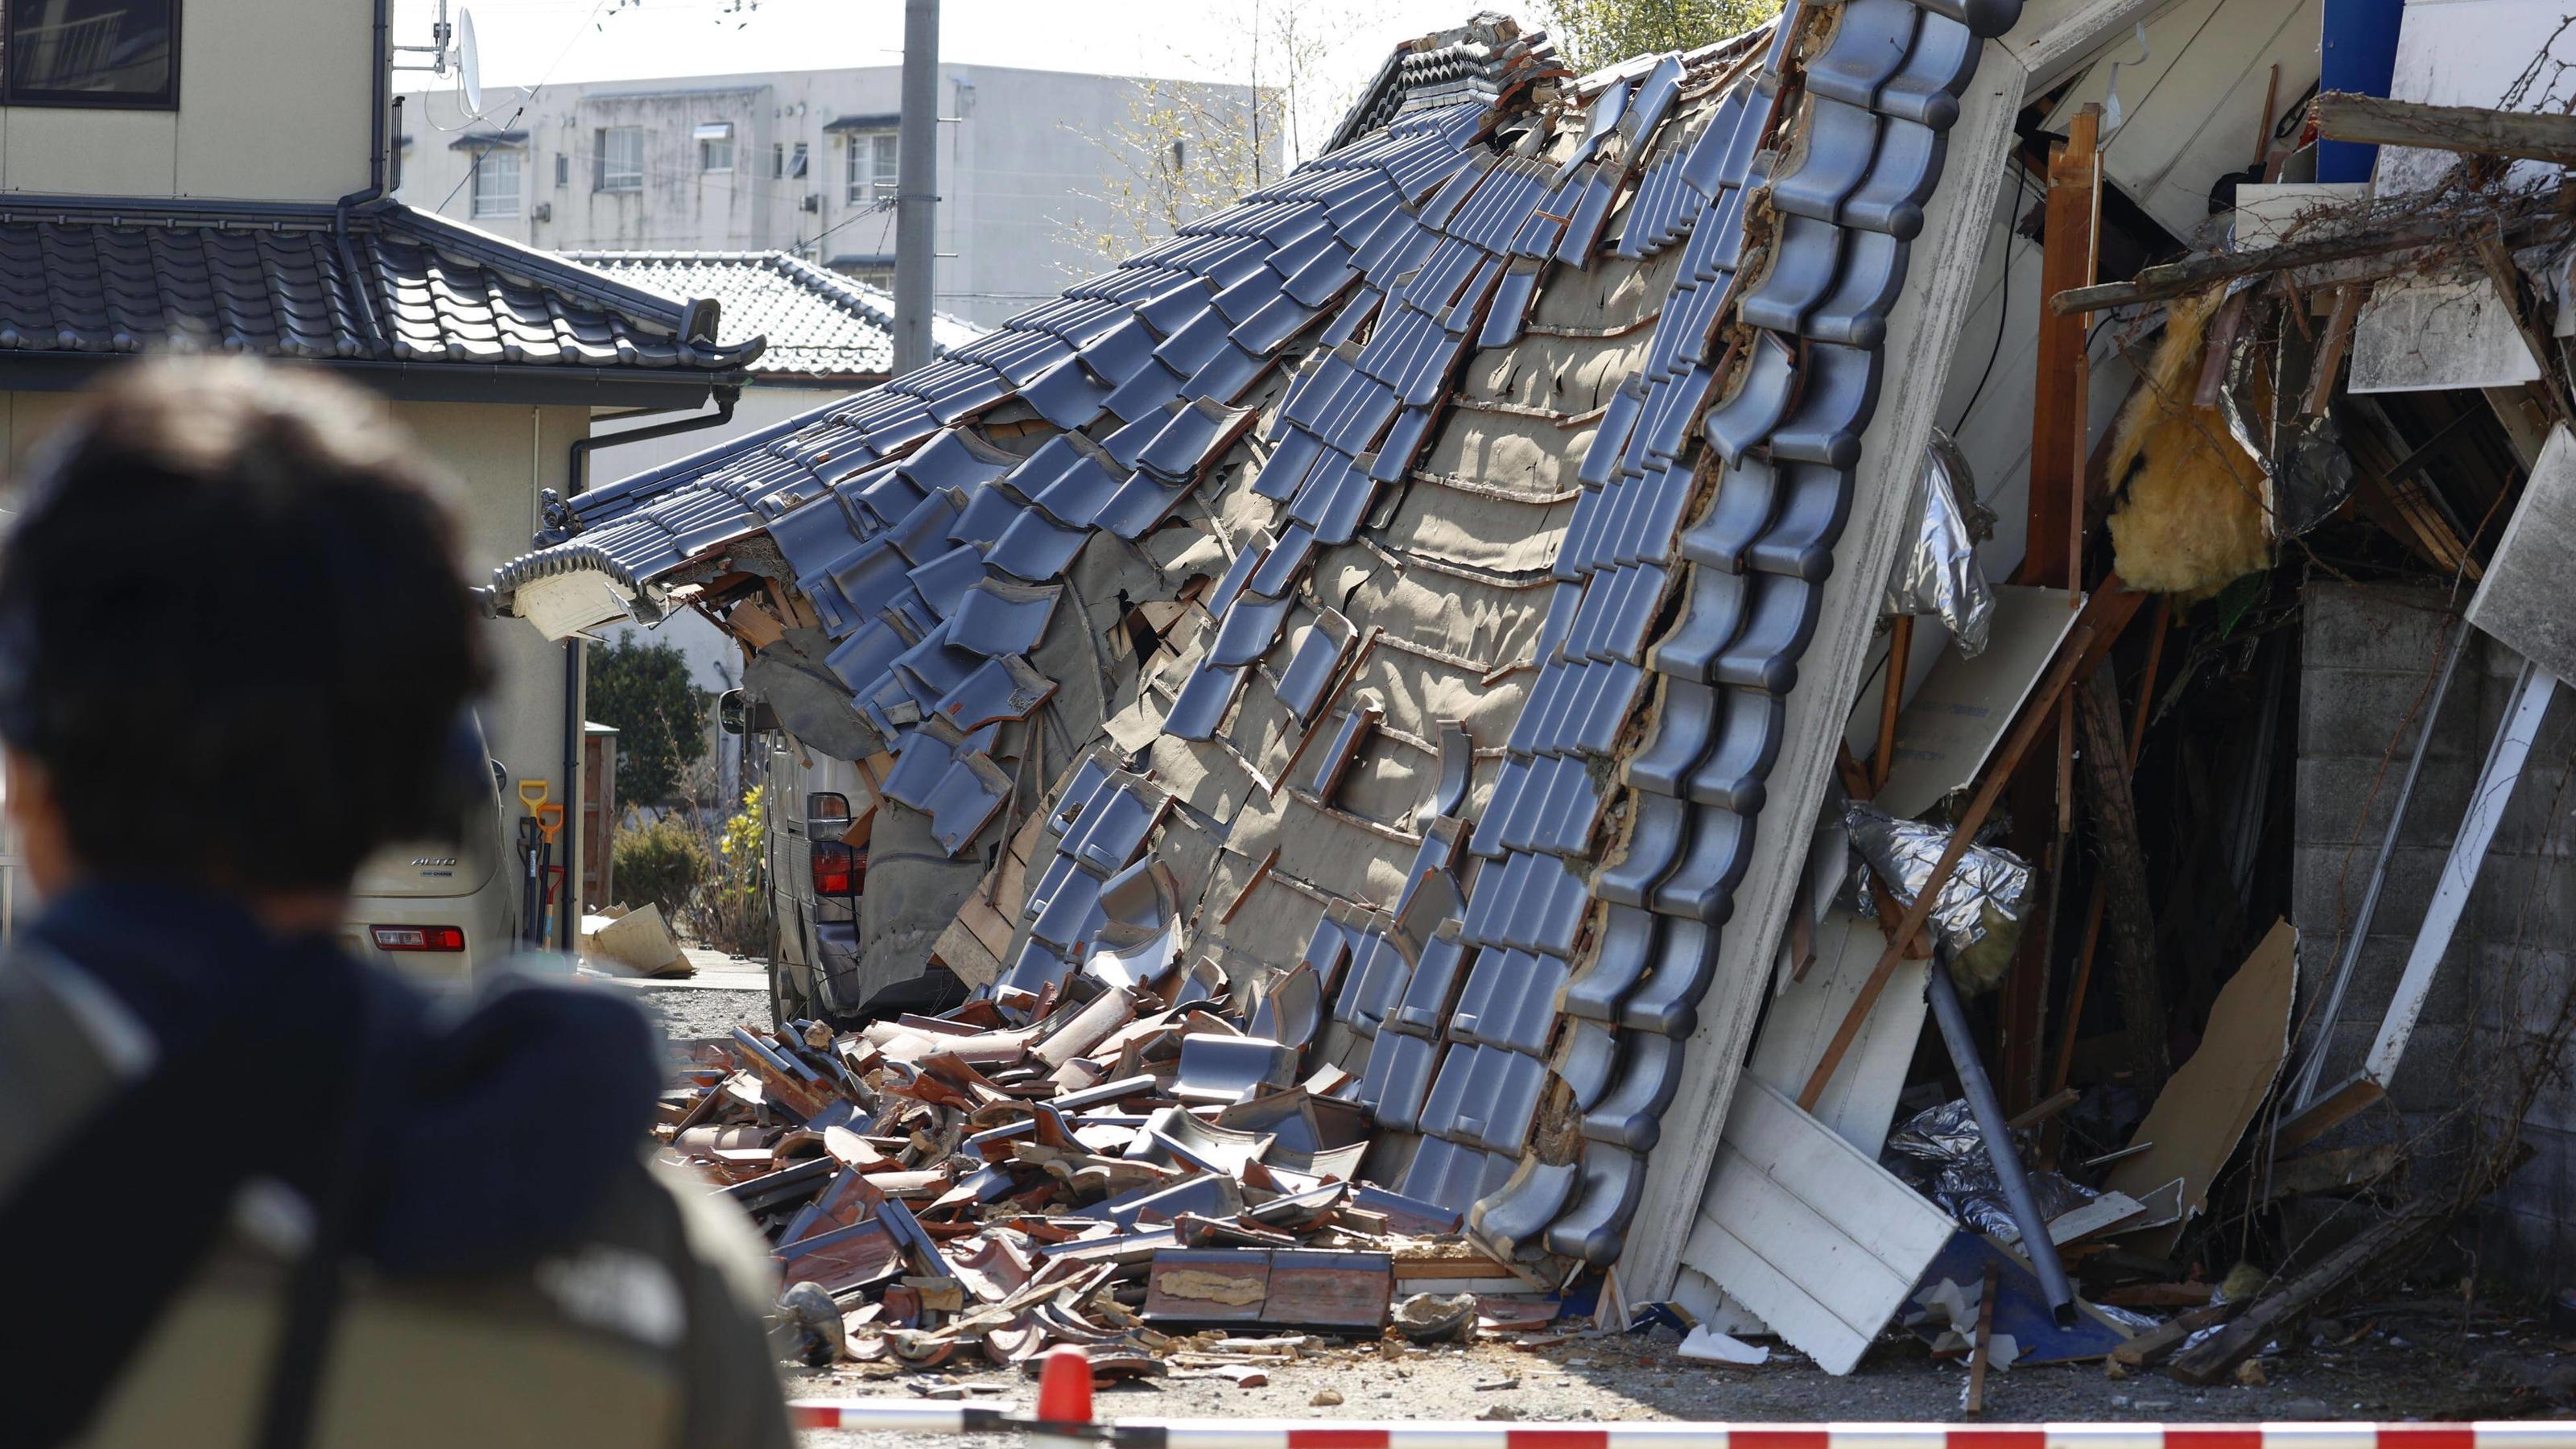 Japan, Schäden nach Erdbeben in der Region Fukushima  Powerful quake rocks northeastern Japan A collapsed house is seen in the Fukushima Prefecture town of Kunimi in northeastern Japan on March 17, 2022, after a powerful earthquake struck the region 